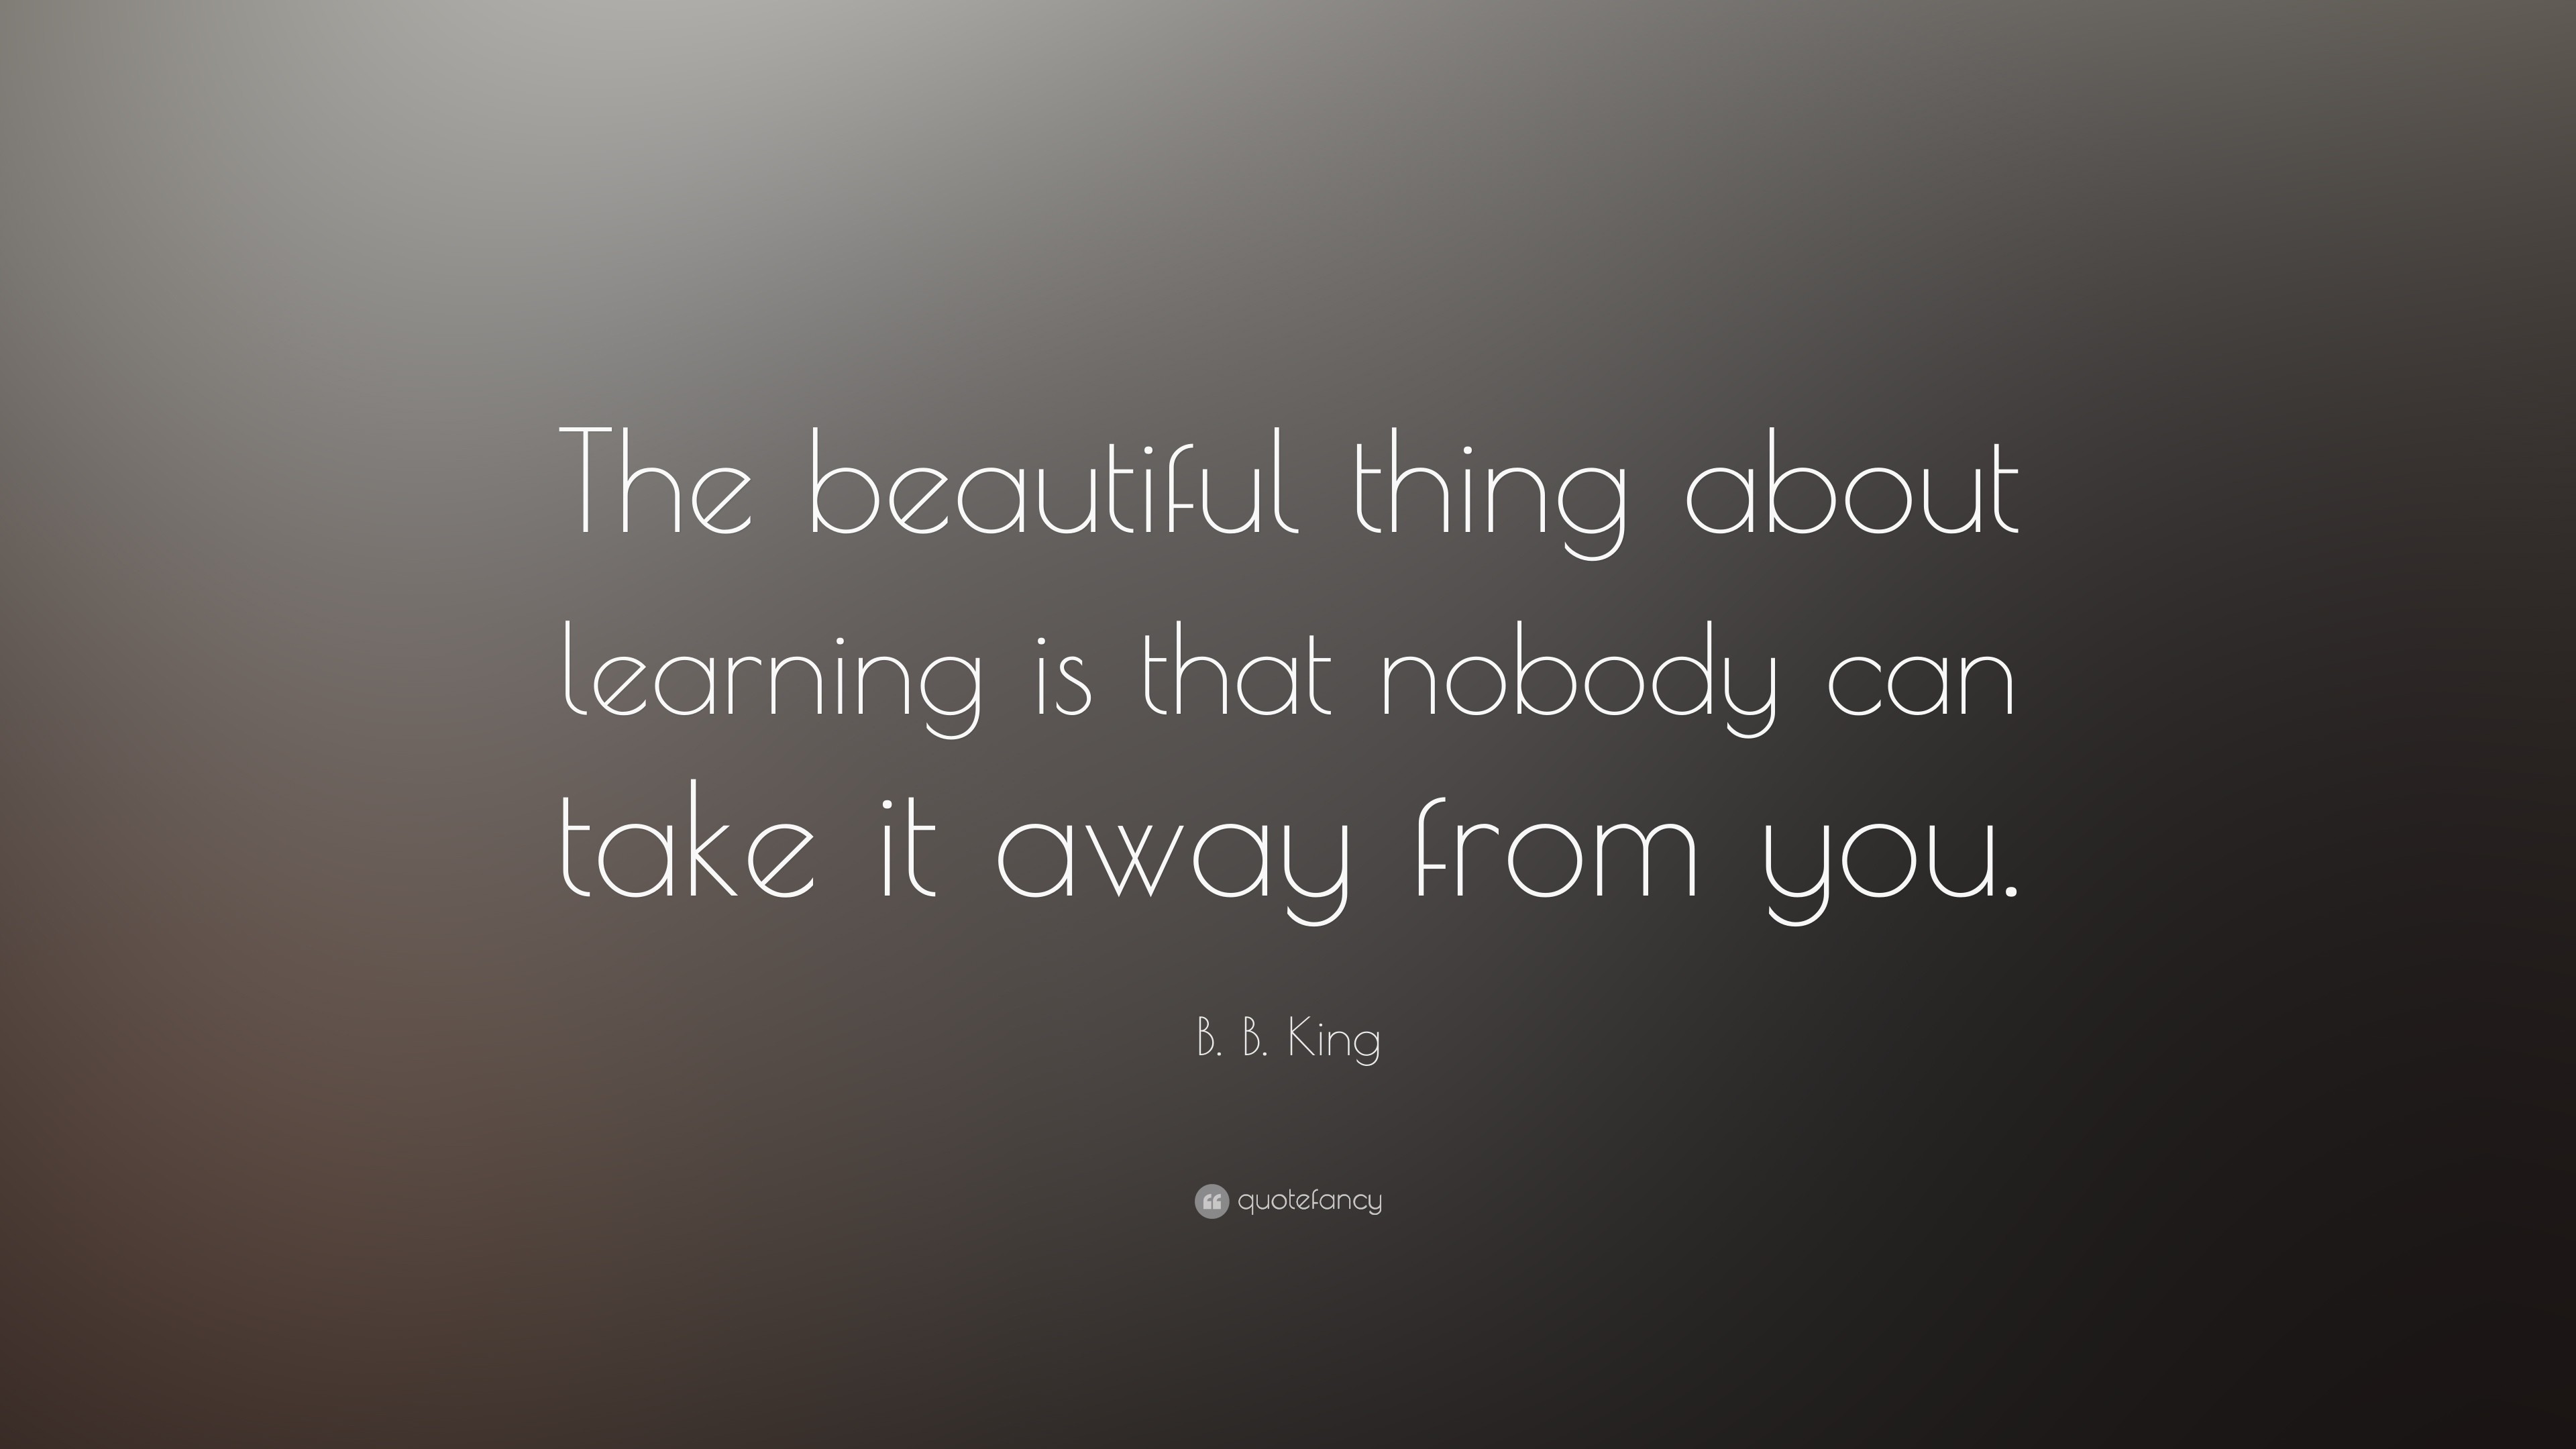 3840x2160 B. B. King Quote: “The beautiful thing about learning is that nobody can  take it